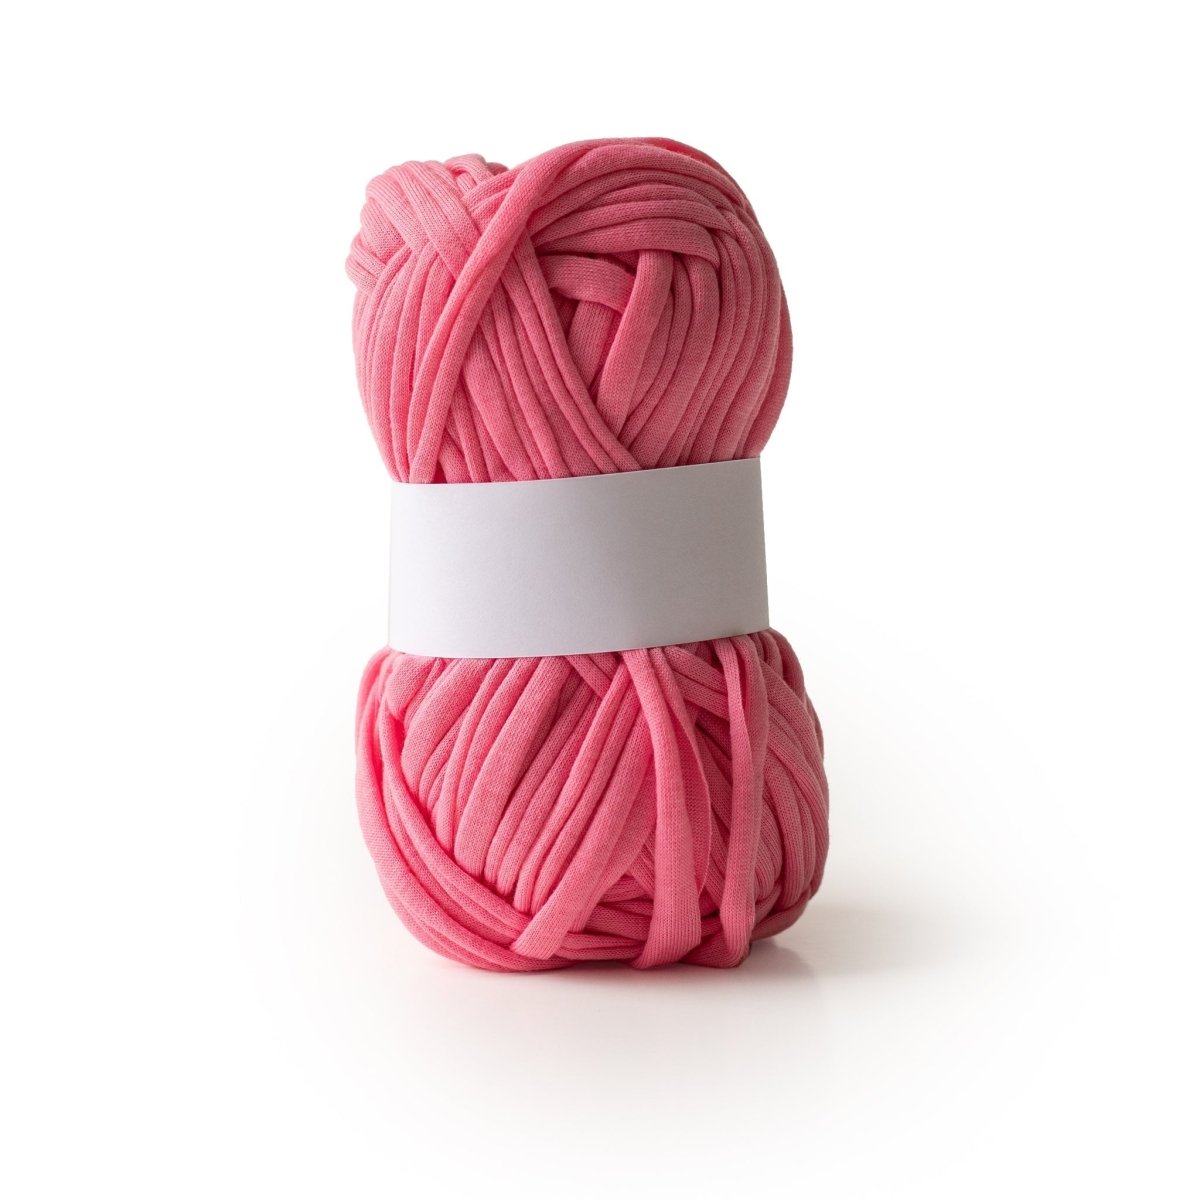 Cording Jersey T-Shirt Yarn Bright Pink from Cara & Co Craft Supply